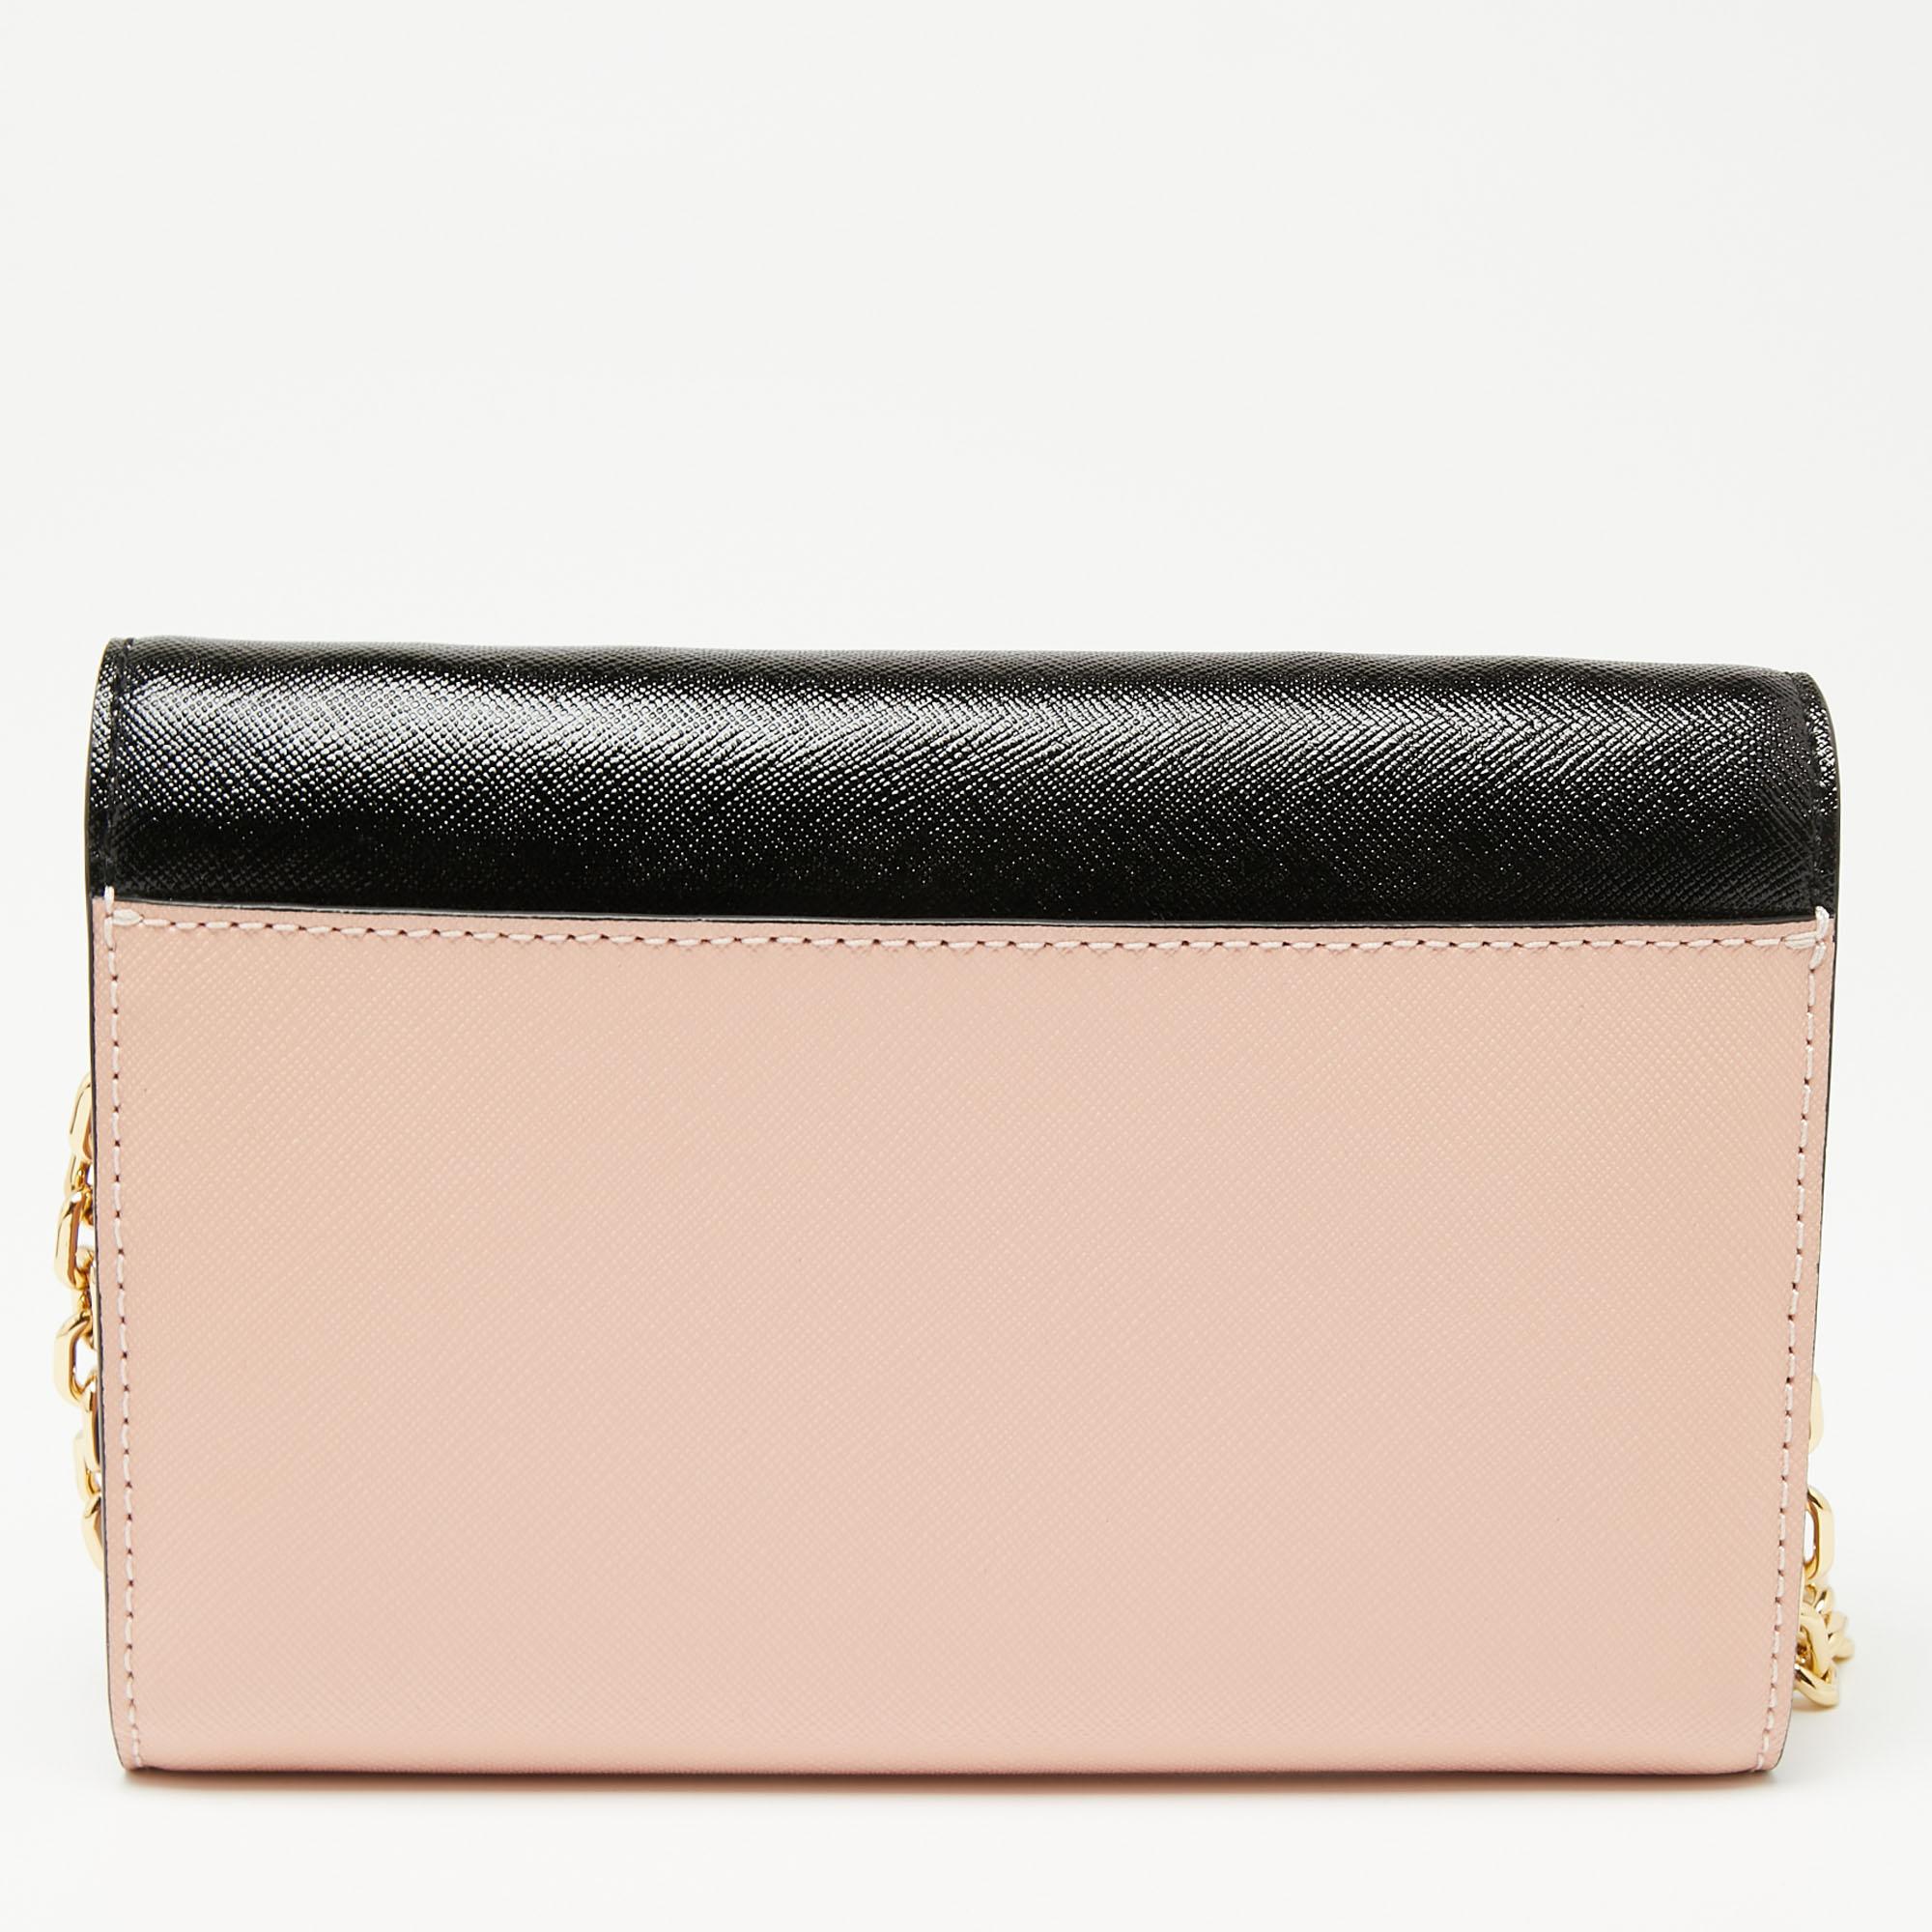 Accessorizing gets a new avatar with this gorgeous Snapshot wallet on chain from Marc Jacobs. It is created using pink-black leather on the exterior and displays a fabric-lined interior and gold-tone hardware. Add a chic touch to your outfit with